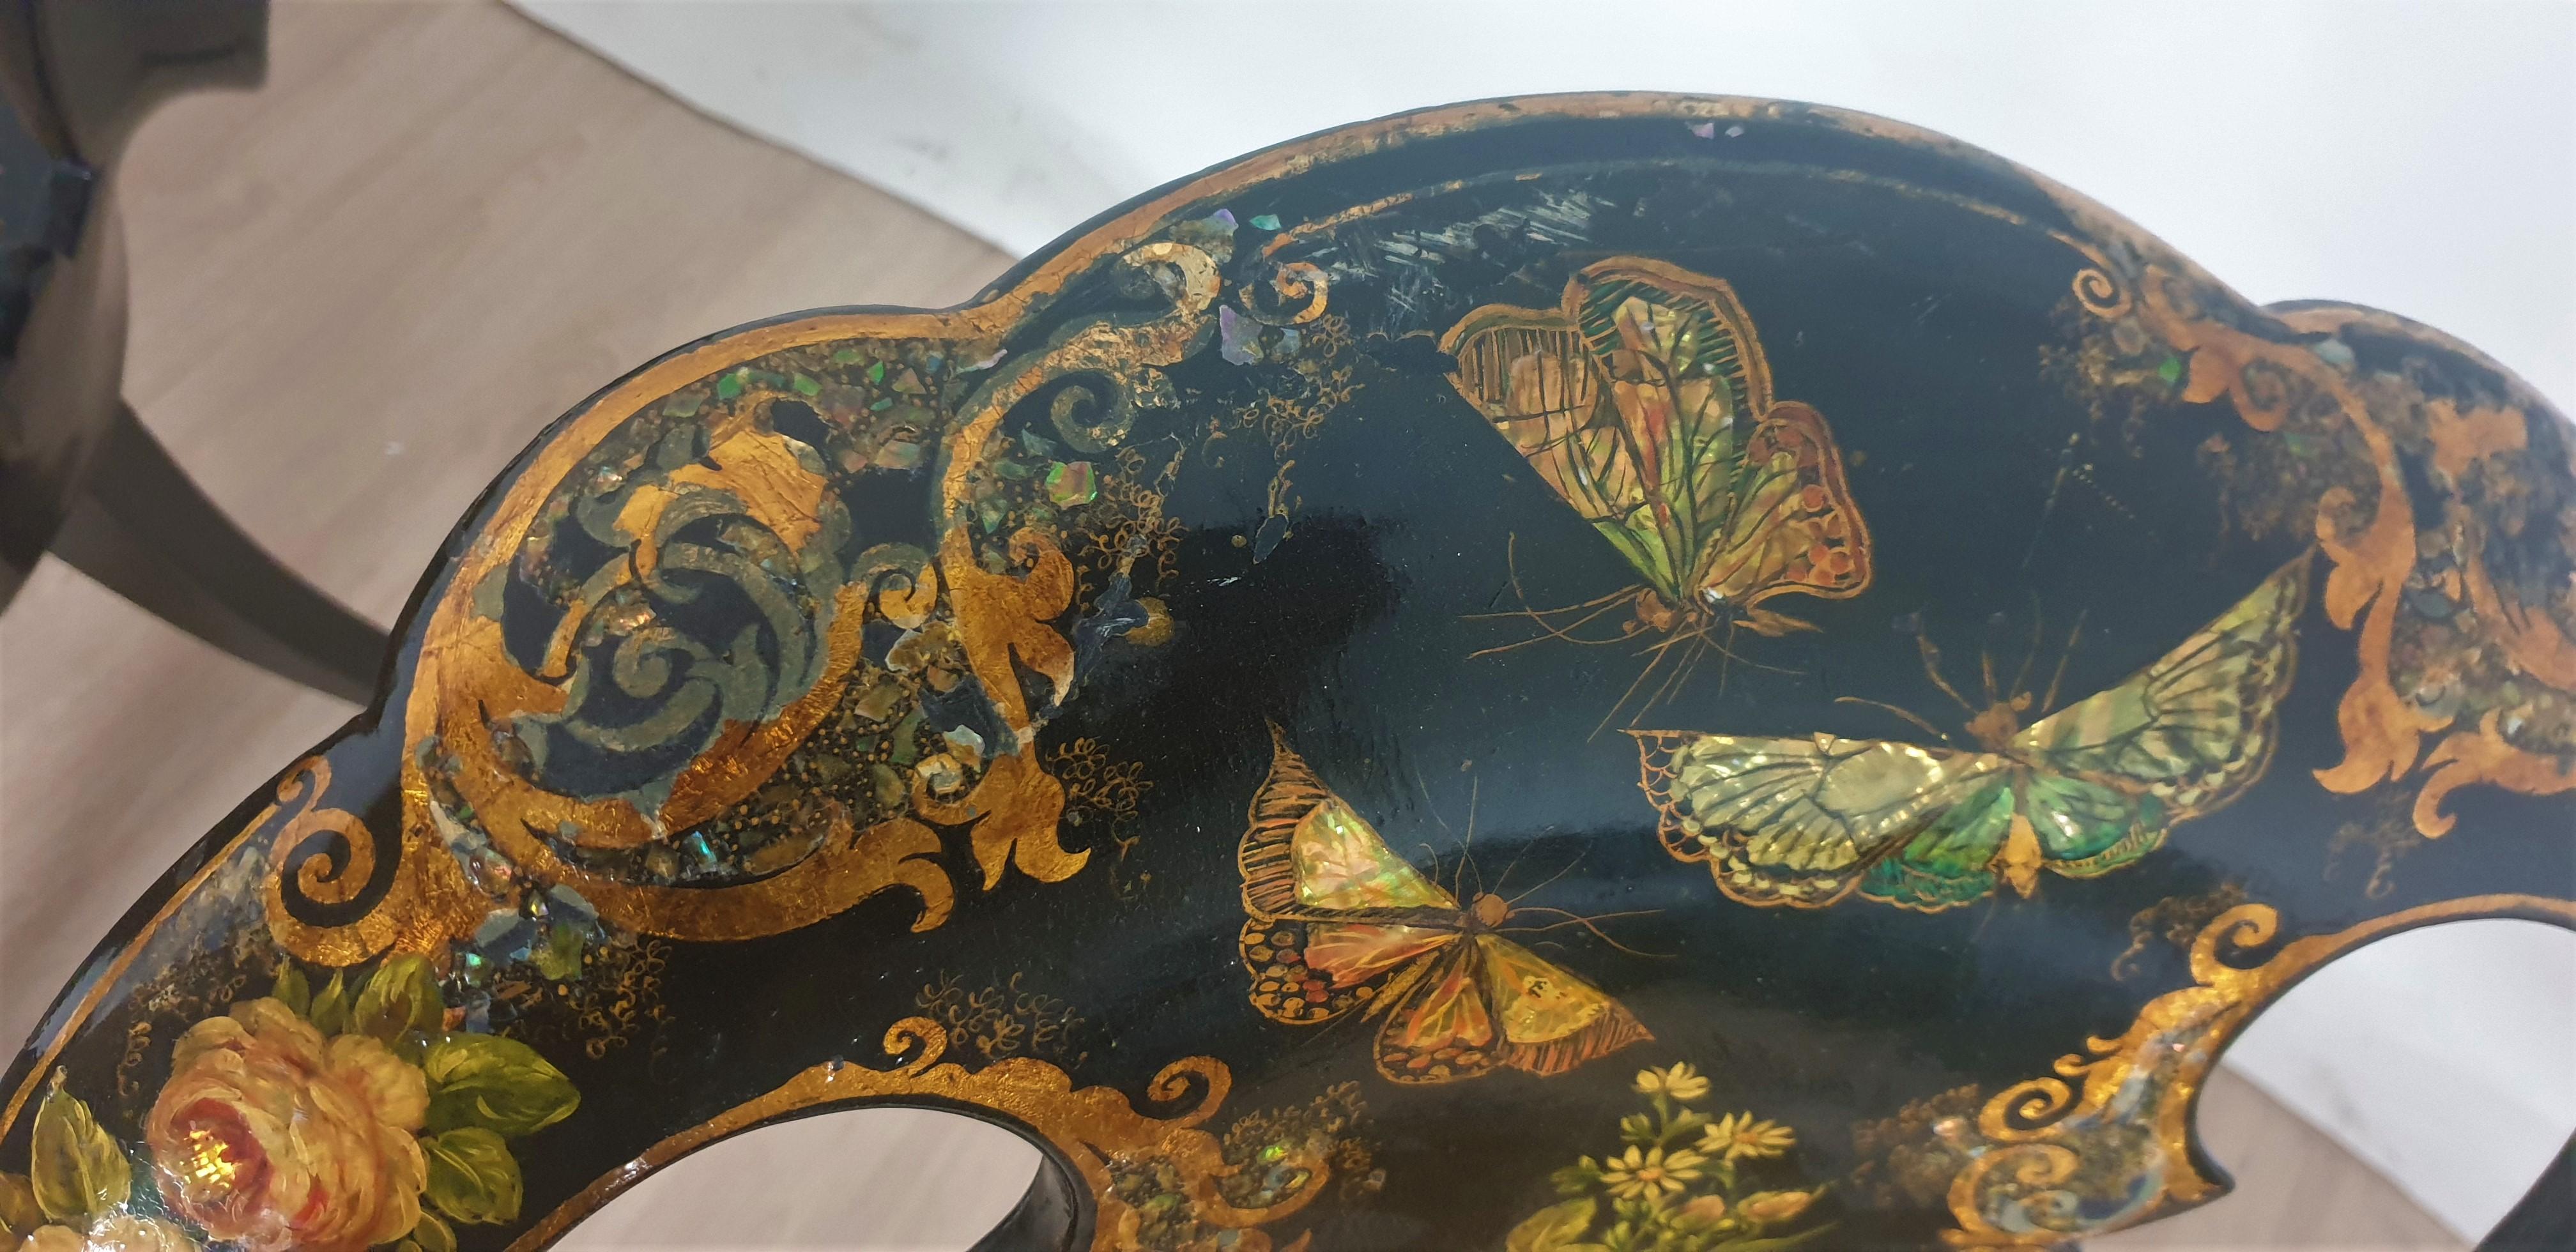 Beautiful pair of papier-mâché armchairs, decorated with painted flowers and butterflies or in mother-of-pearl, on a black lacquered background

The seat is in caning, in good condition

Work from the 19th century, in good condition despite some